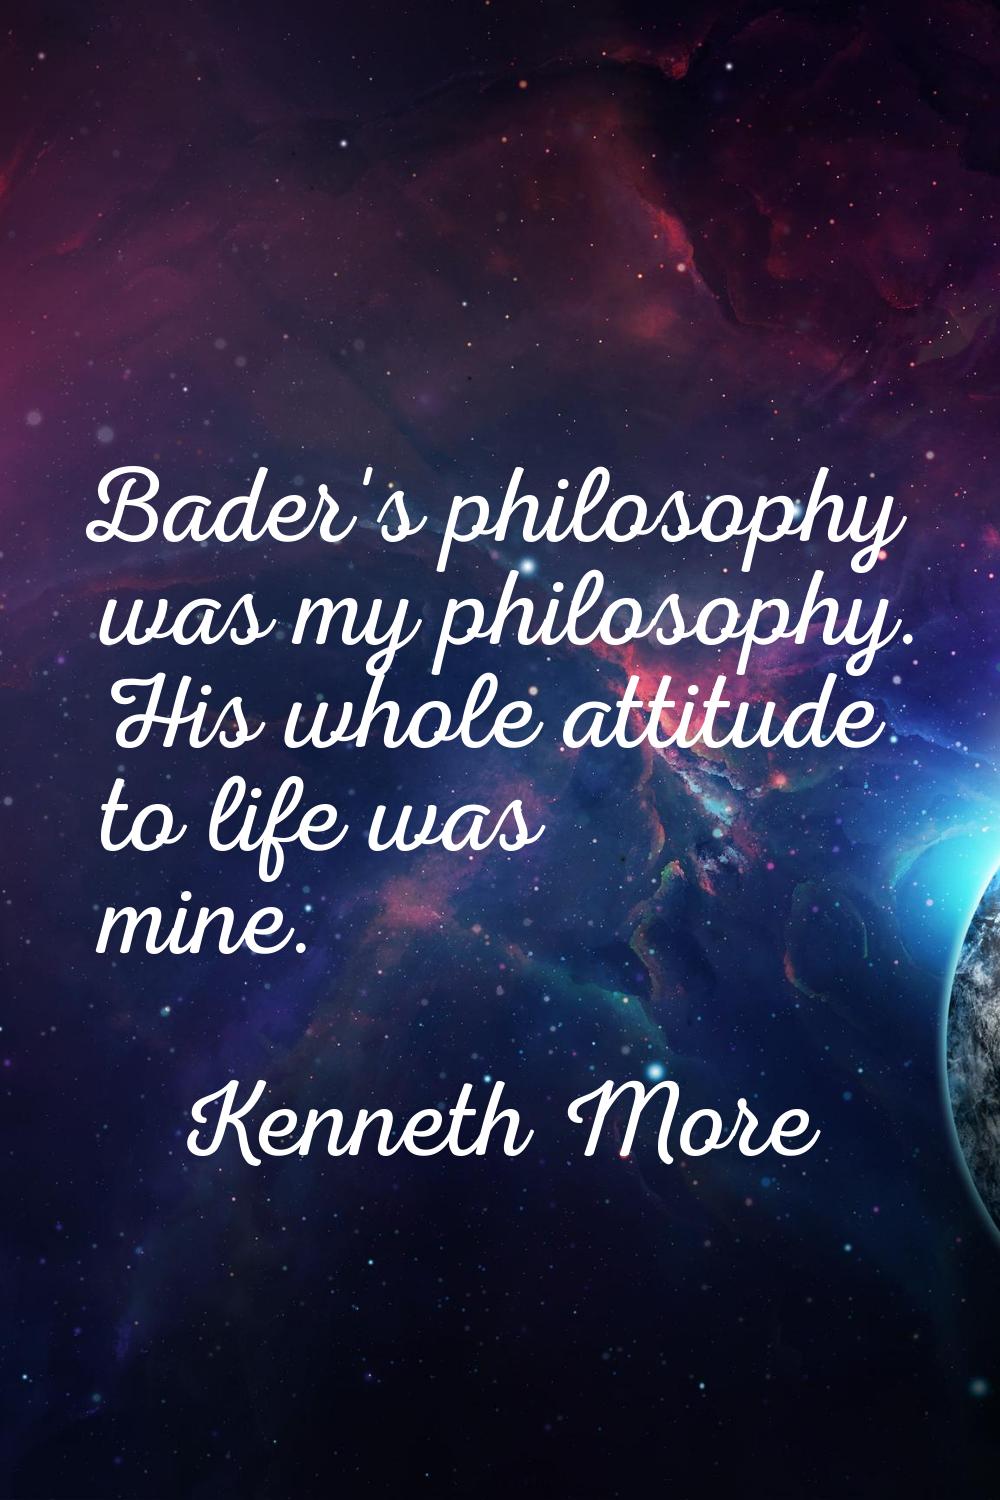 Bader's philosophy was my philosophy. His whole attitude to life was mine.